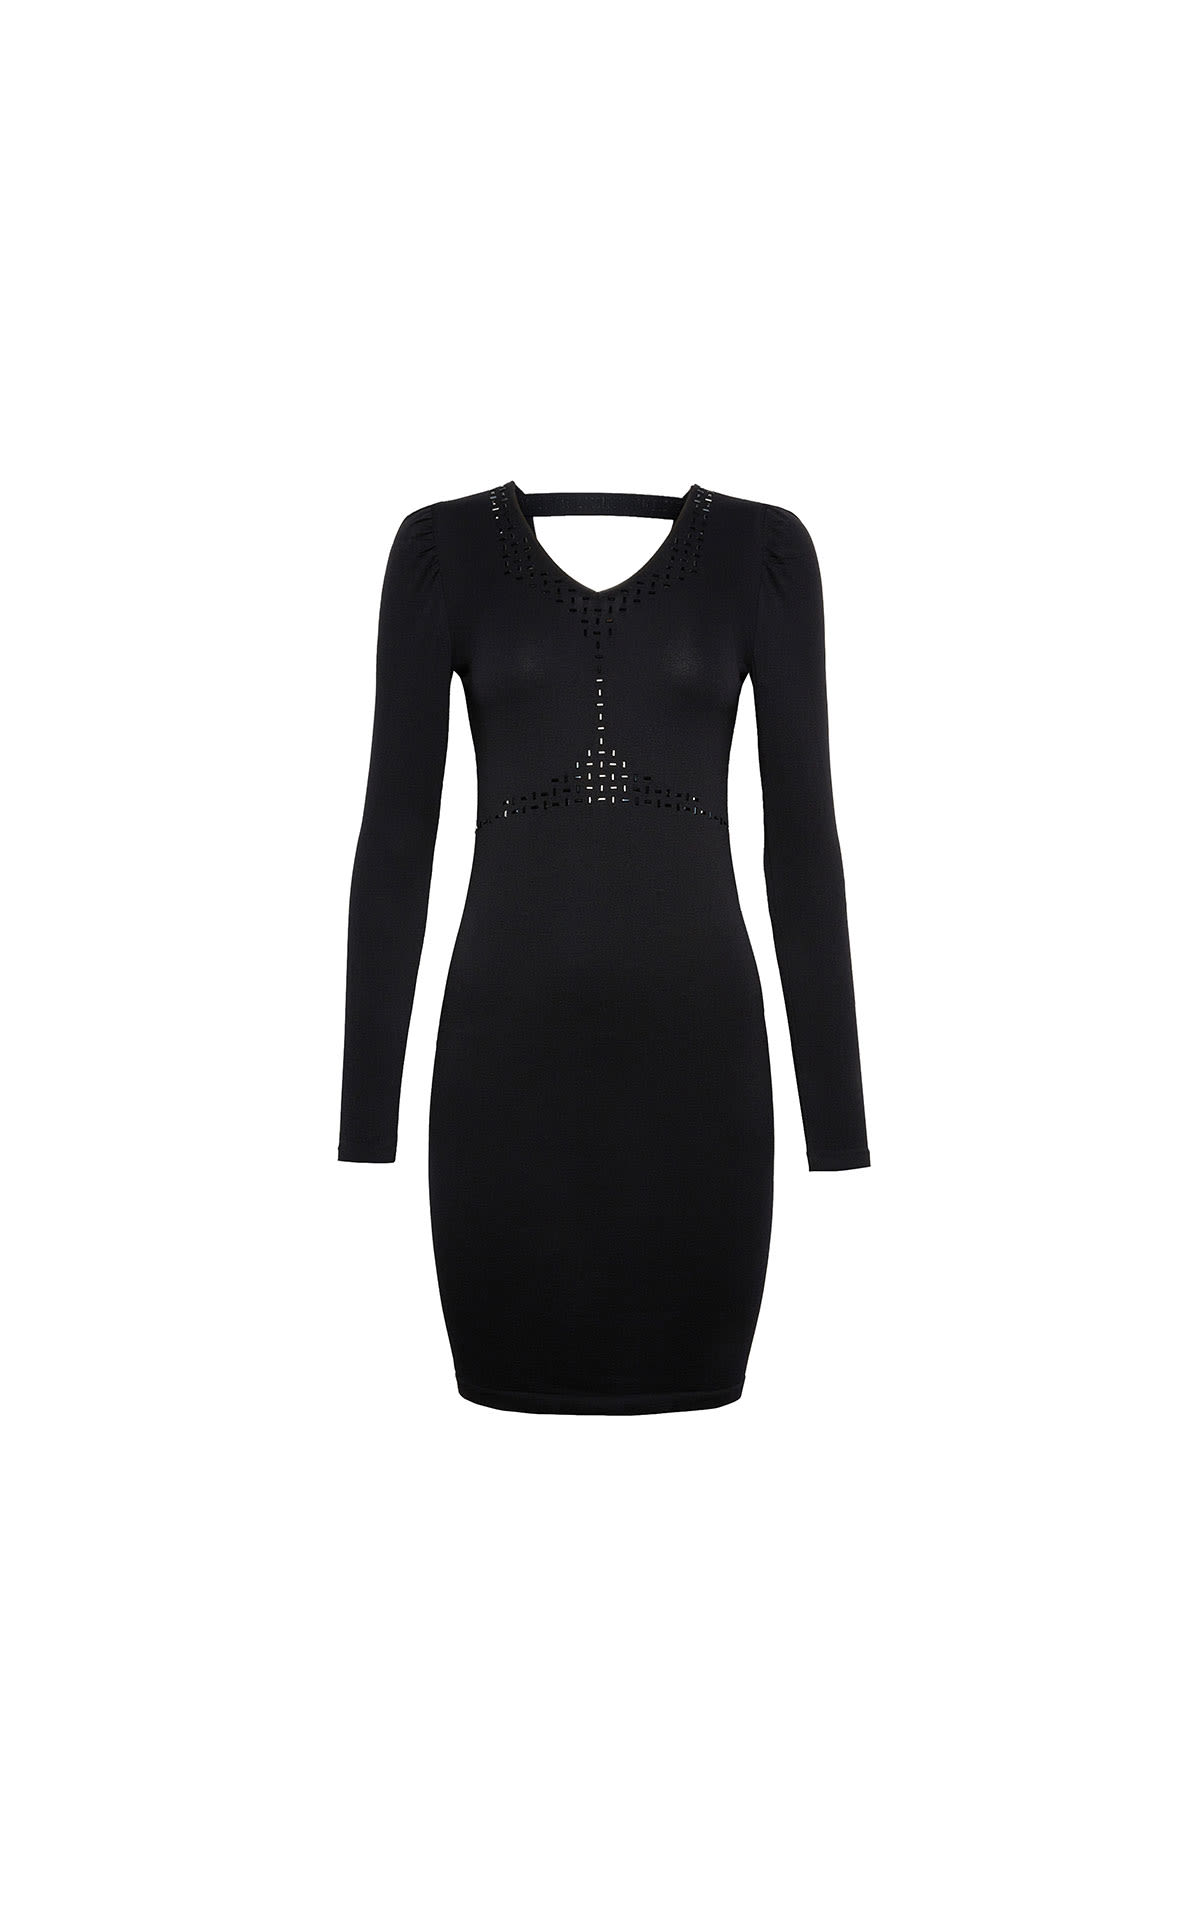 Wolford Gilda dress from Bicester Village